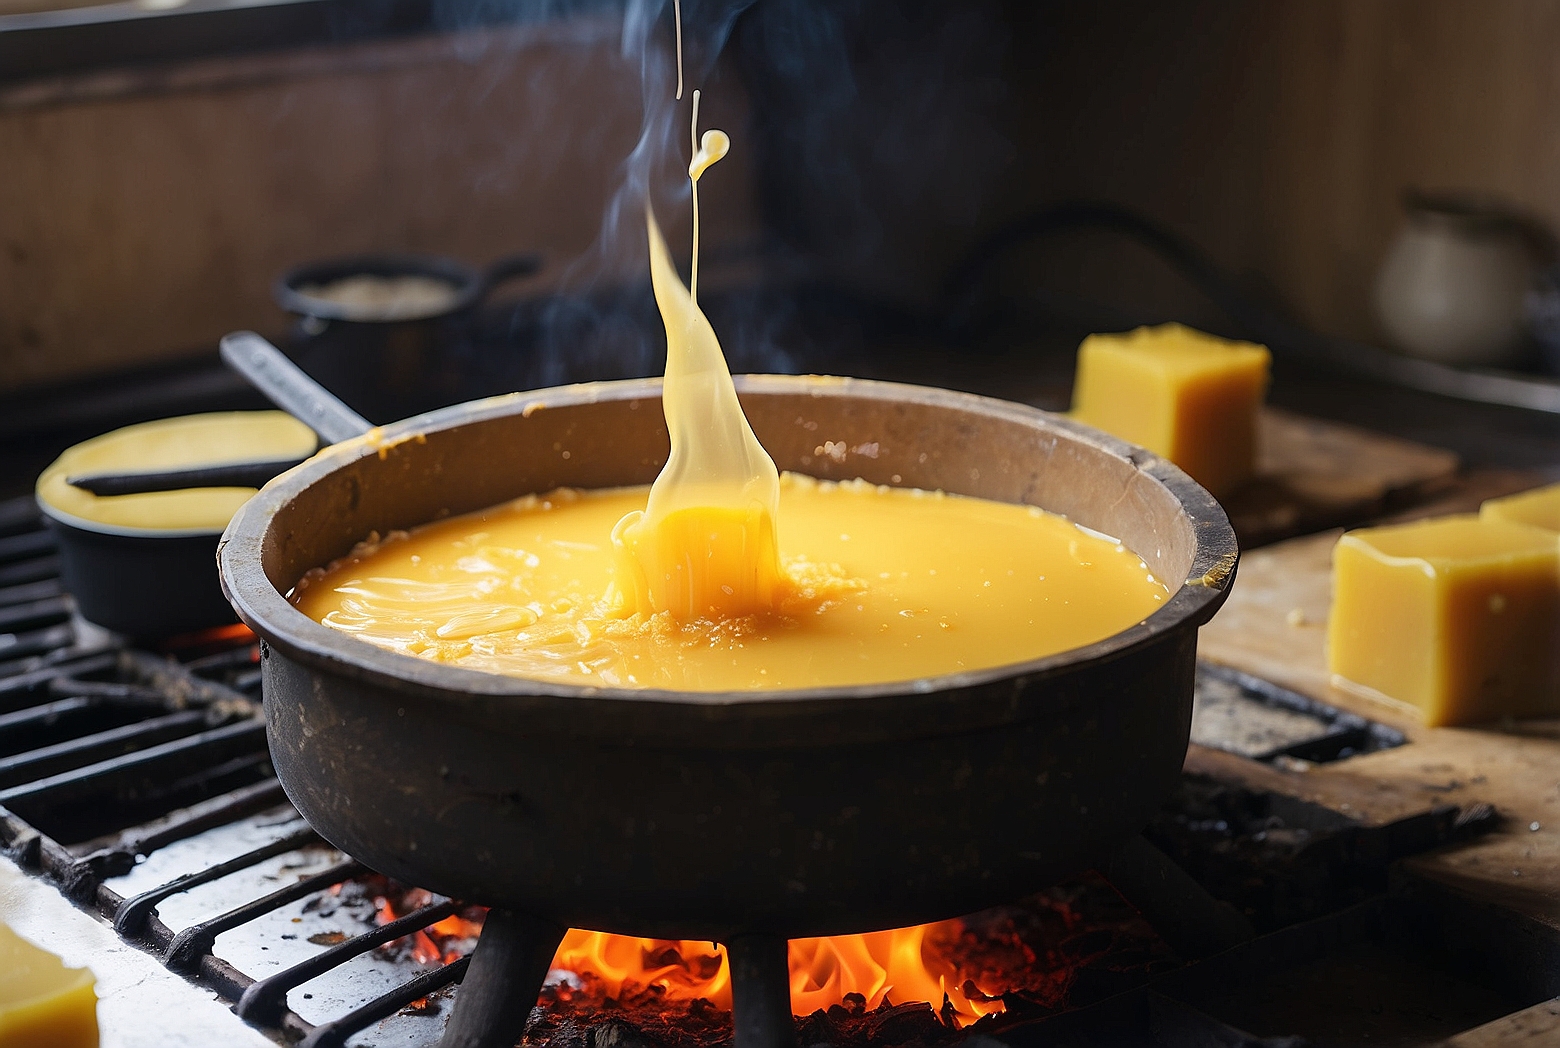 How to Melt Beeswax on a Stove